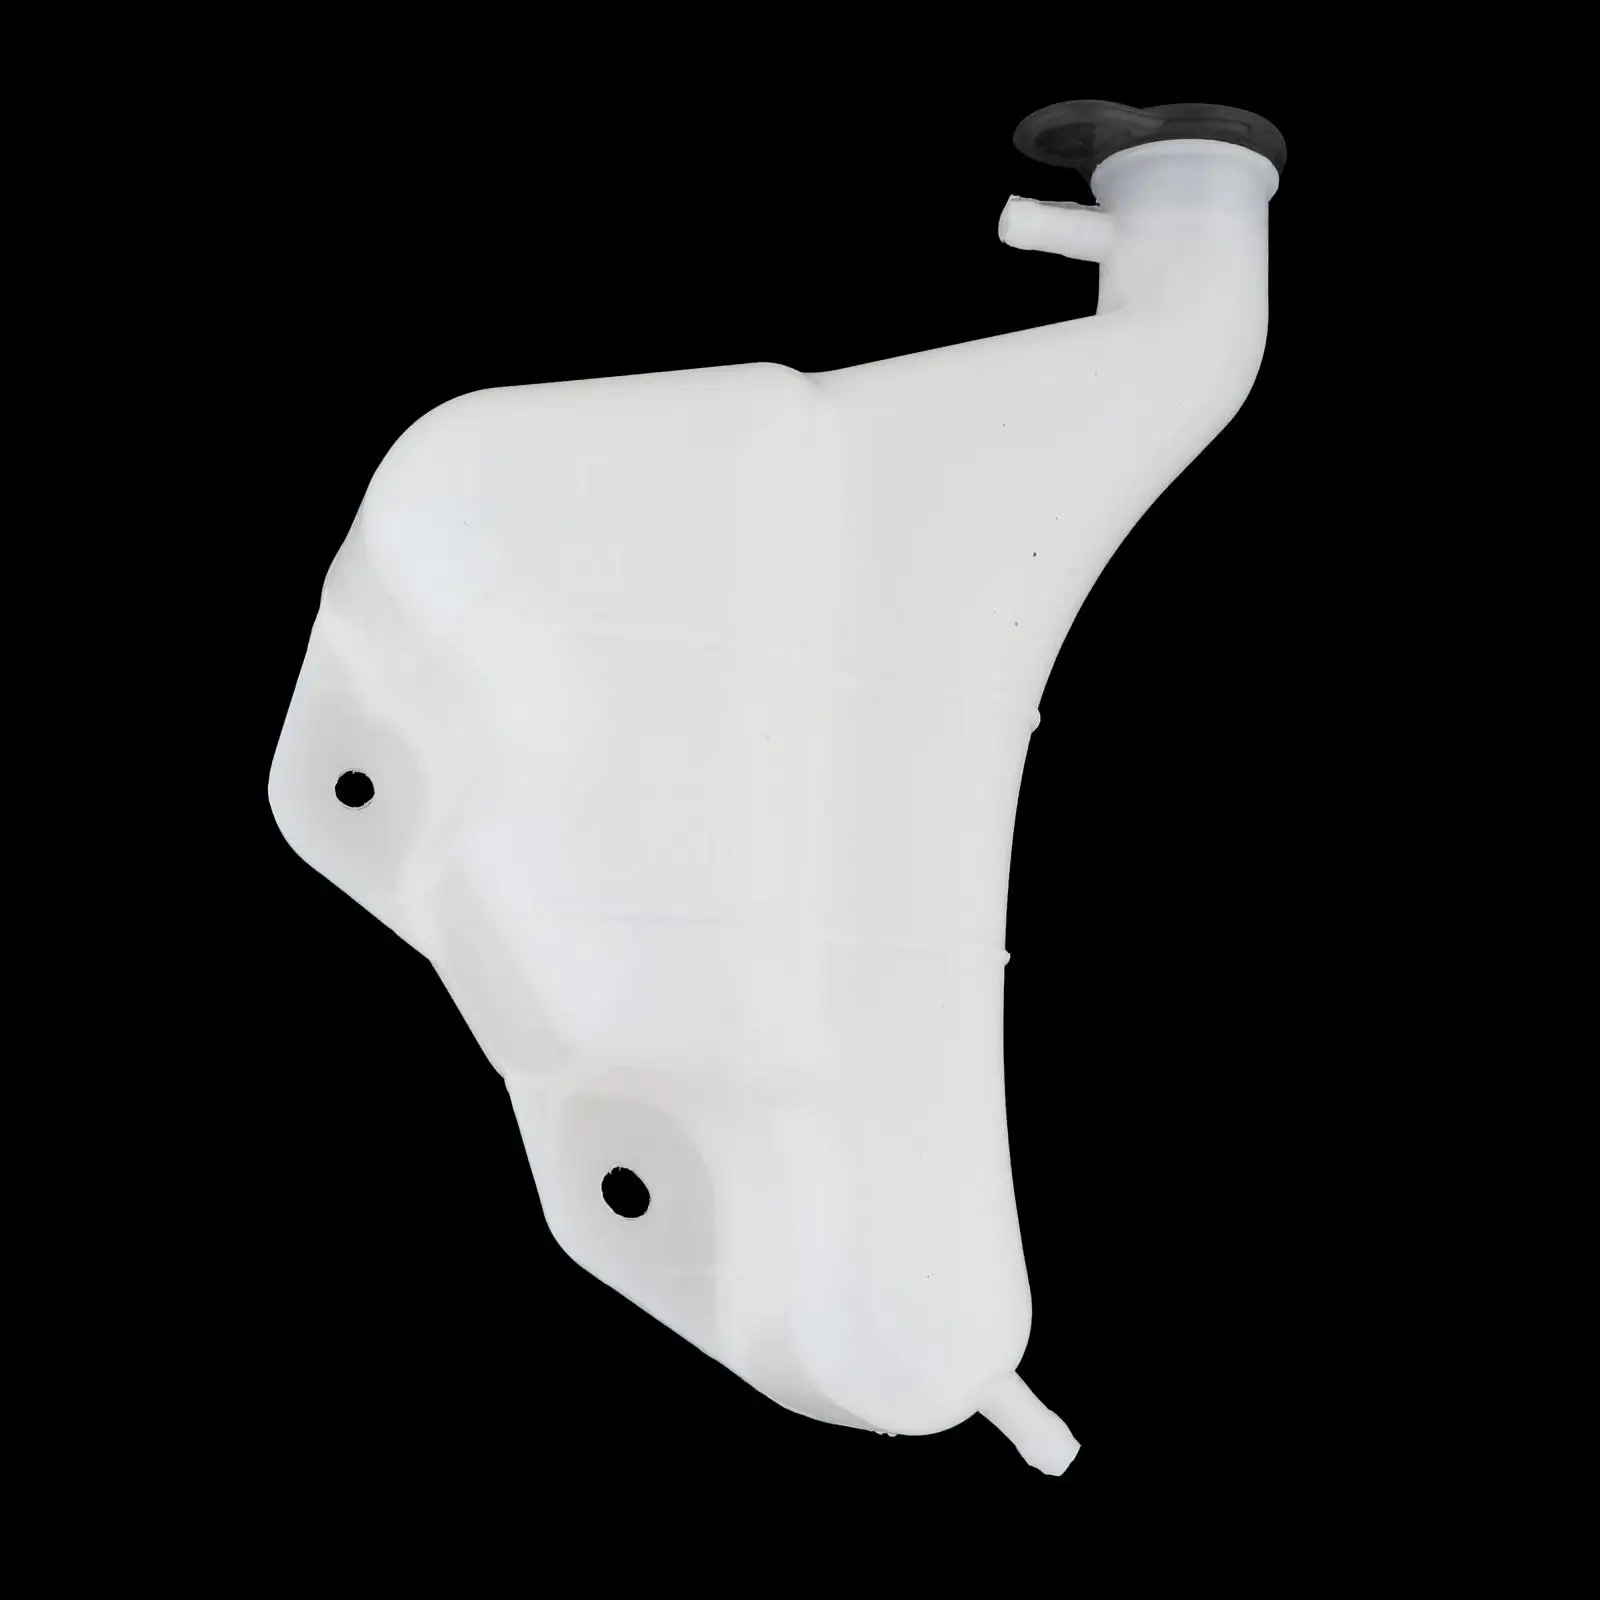 

Overflow Coolant Radiator Tank Reservoir, Fit for Yamaha Raptor 700 2011 2006 2009 2007, Replacement